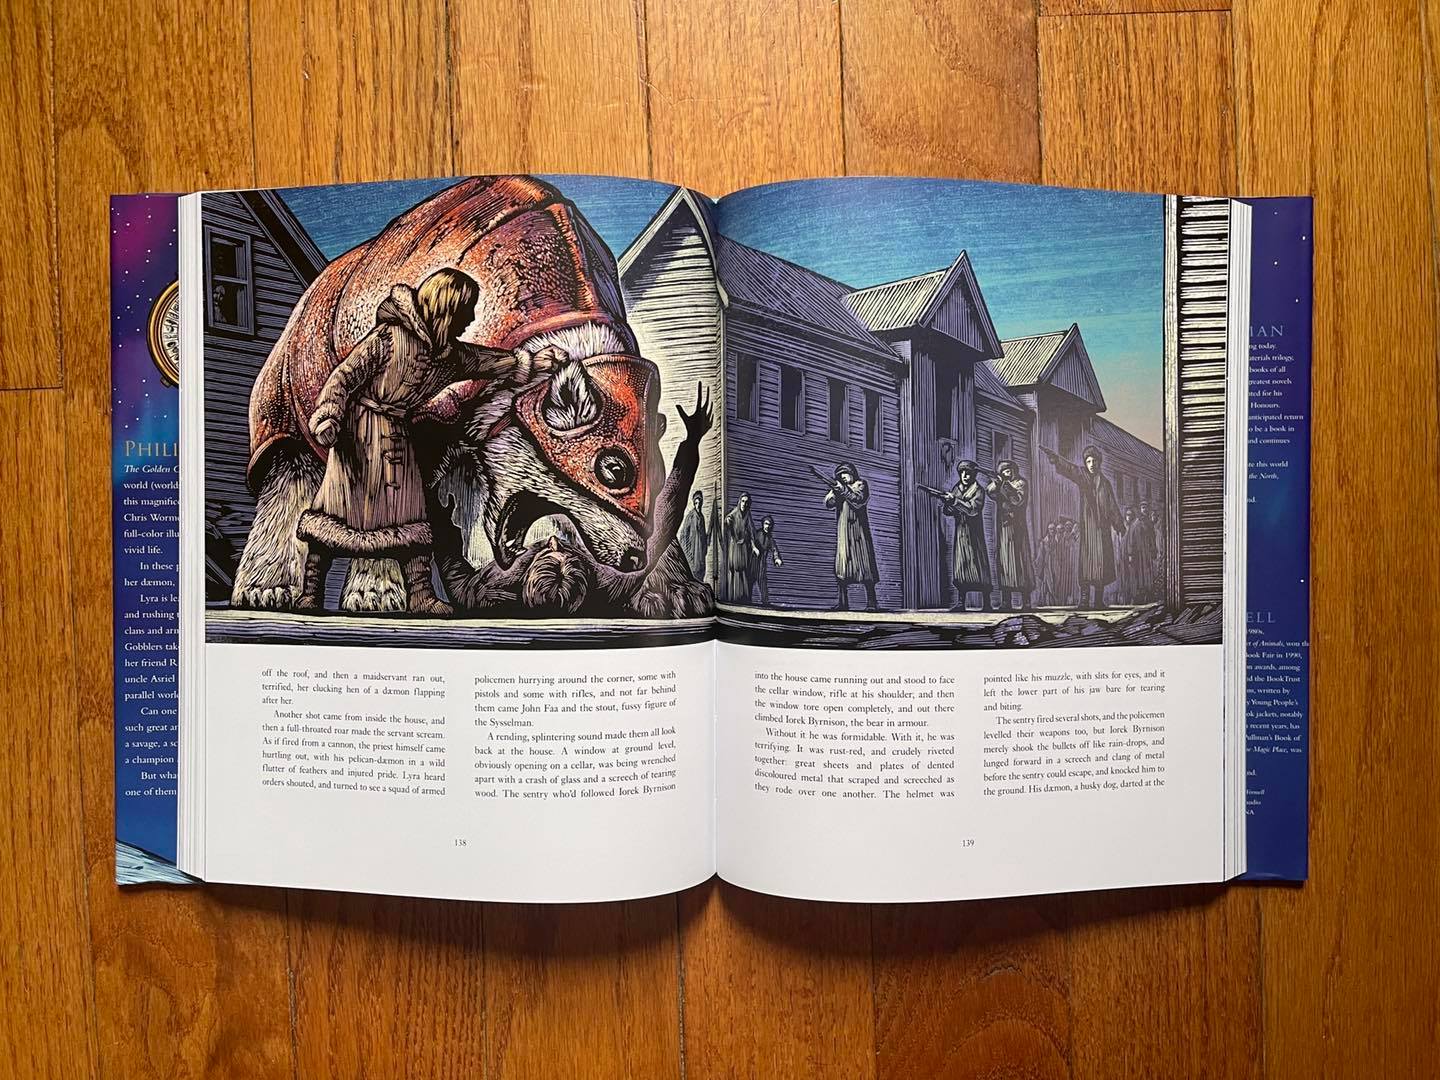 A spread of pages 138-139 of the illustrated edition of The Golden Compass, featuring a polar bear an Lyra.